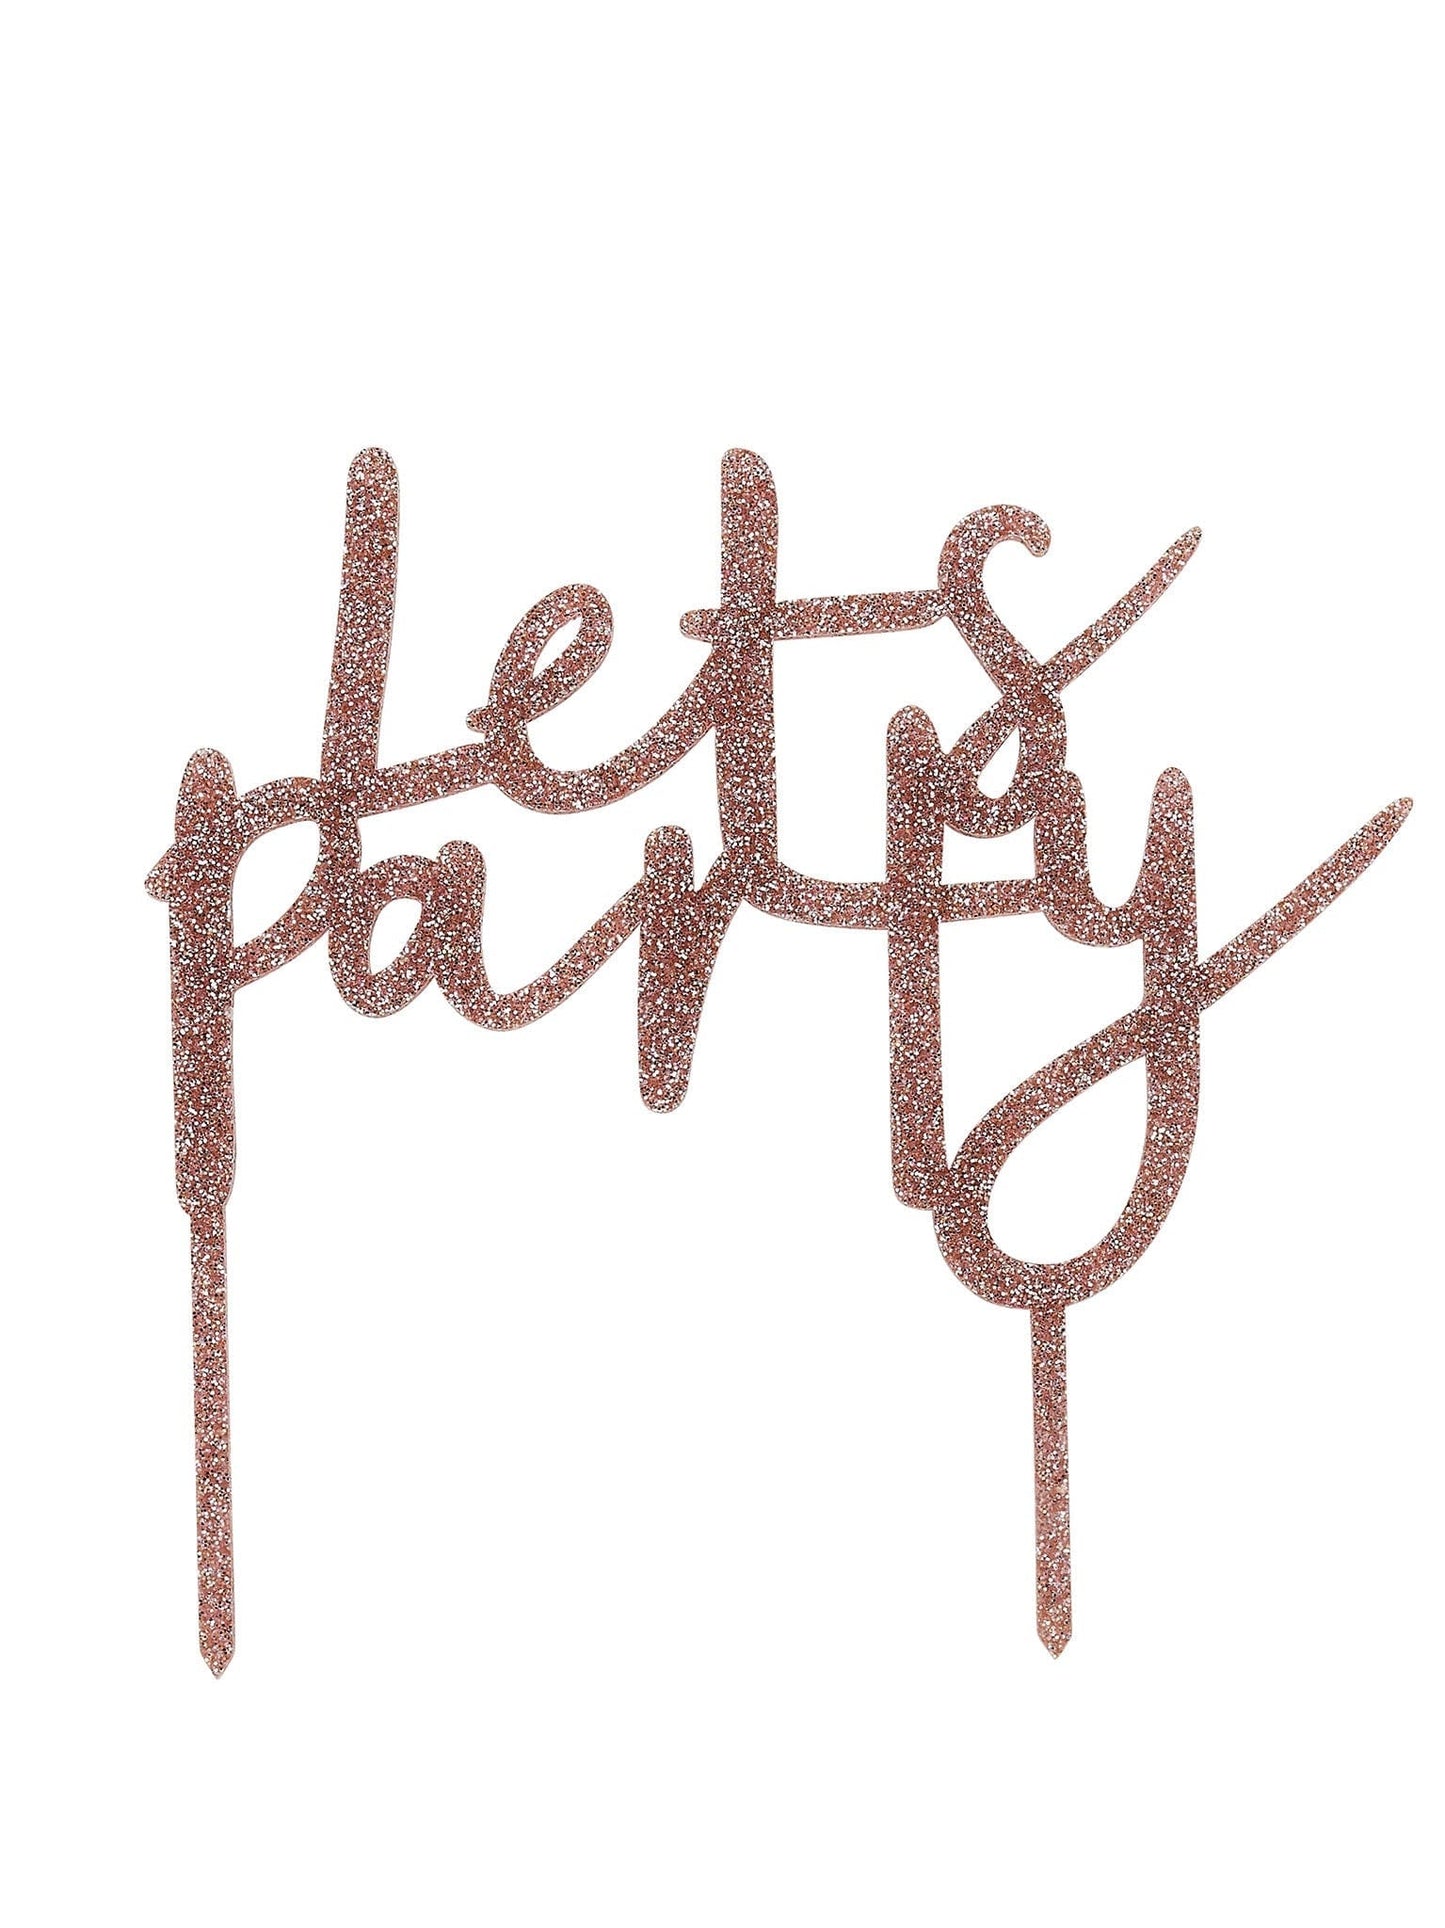 Let's Party Cake Toppers - Patisserie Valerie